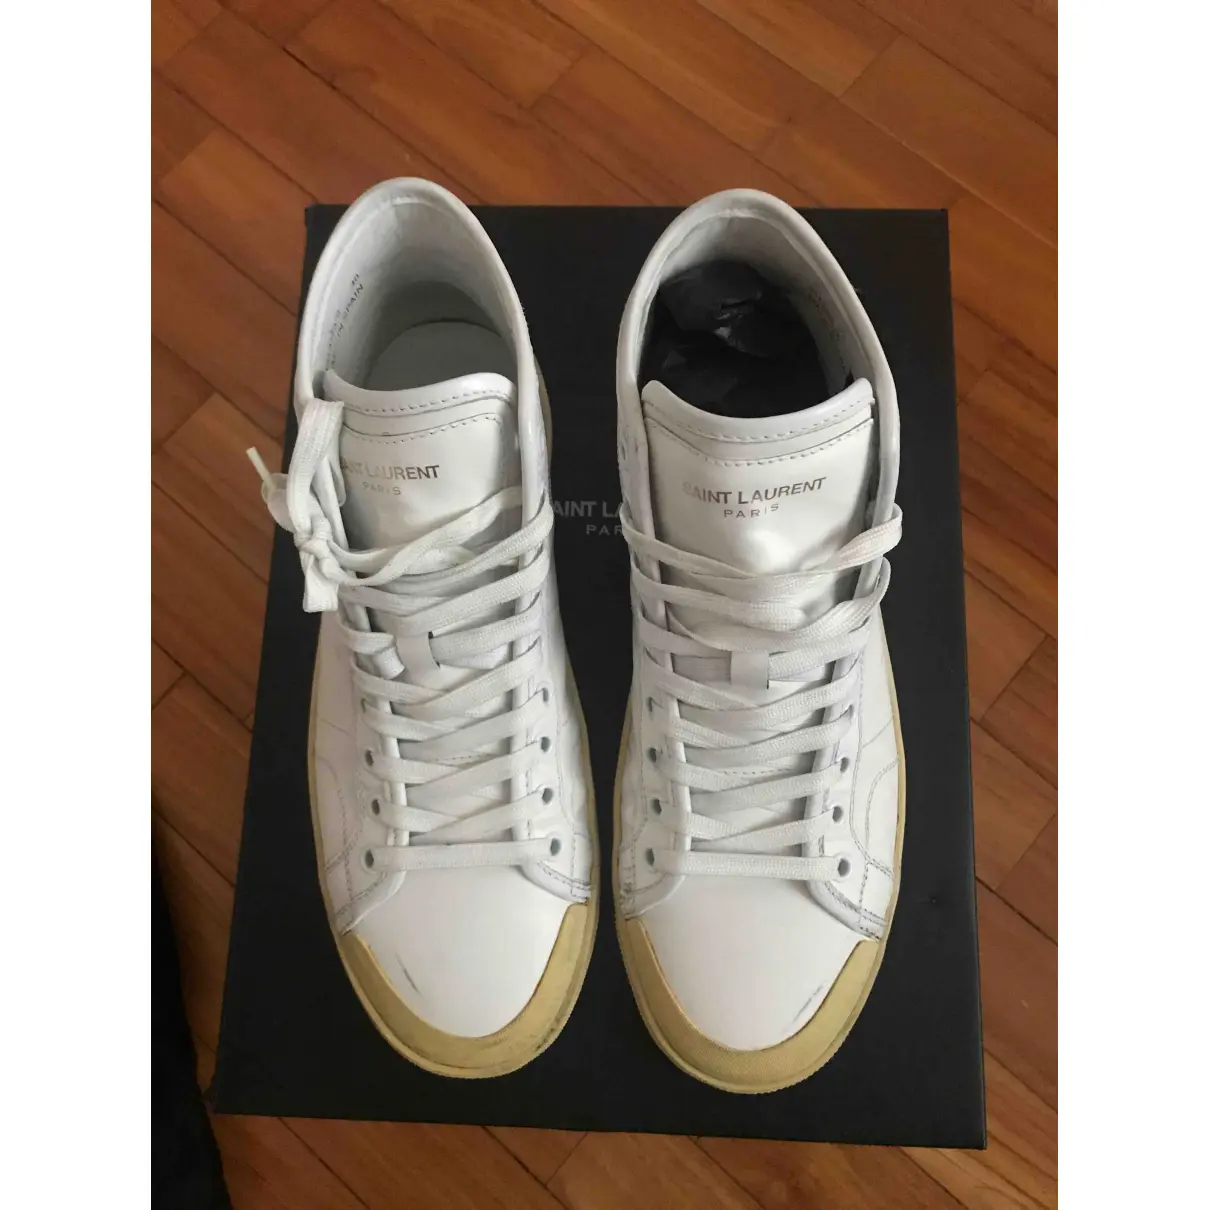 Bedford leather high trainers Saint Laurent